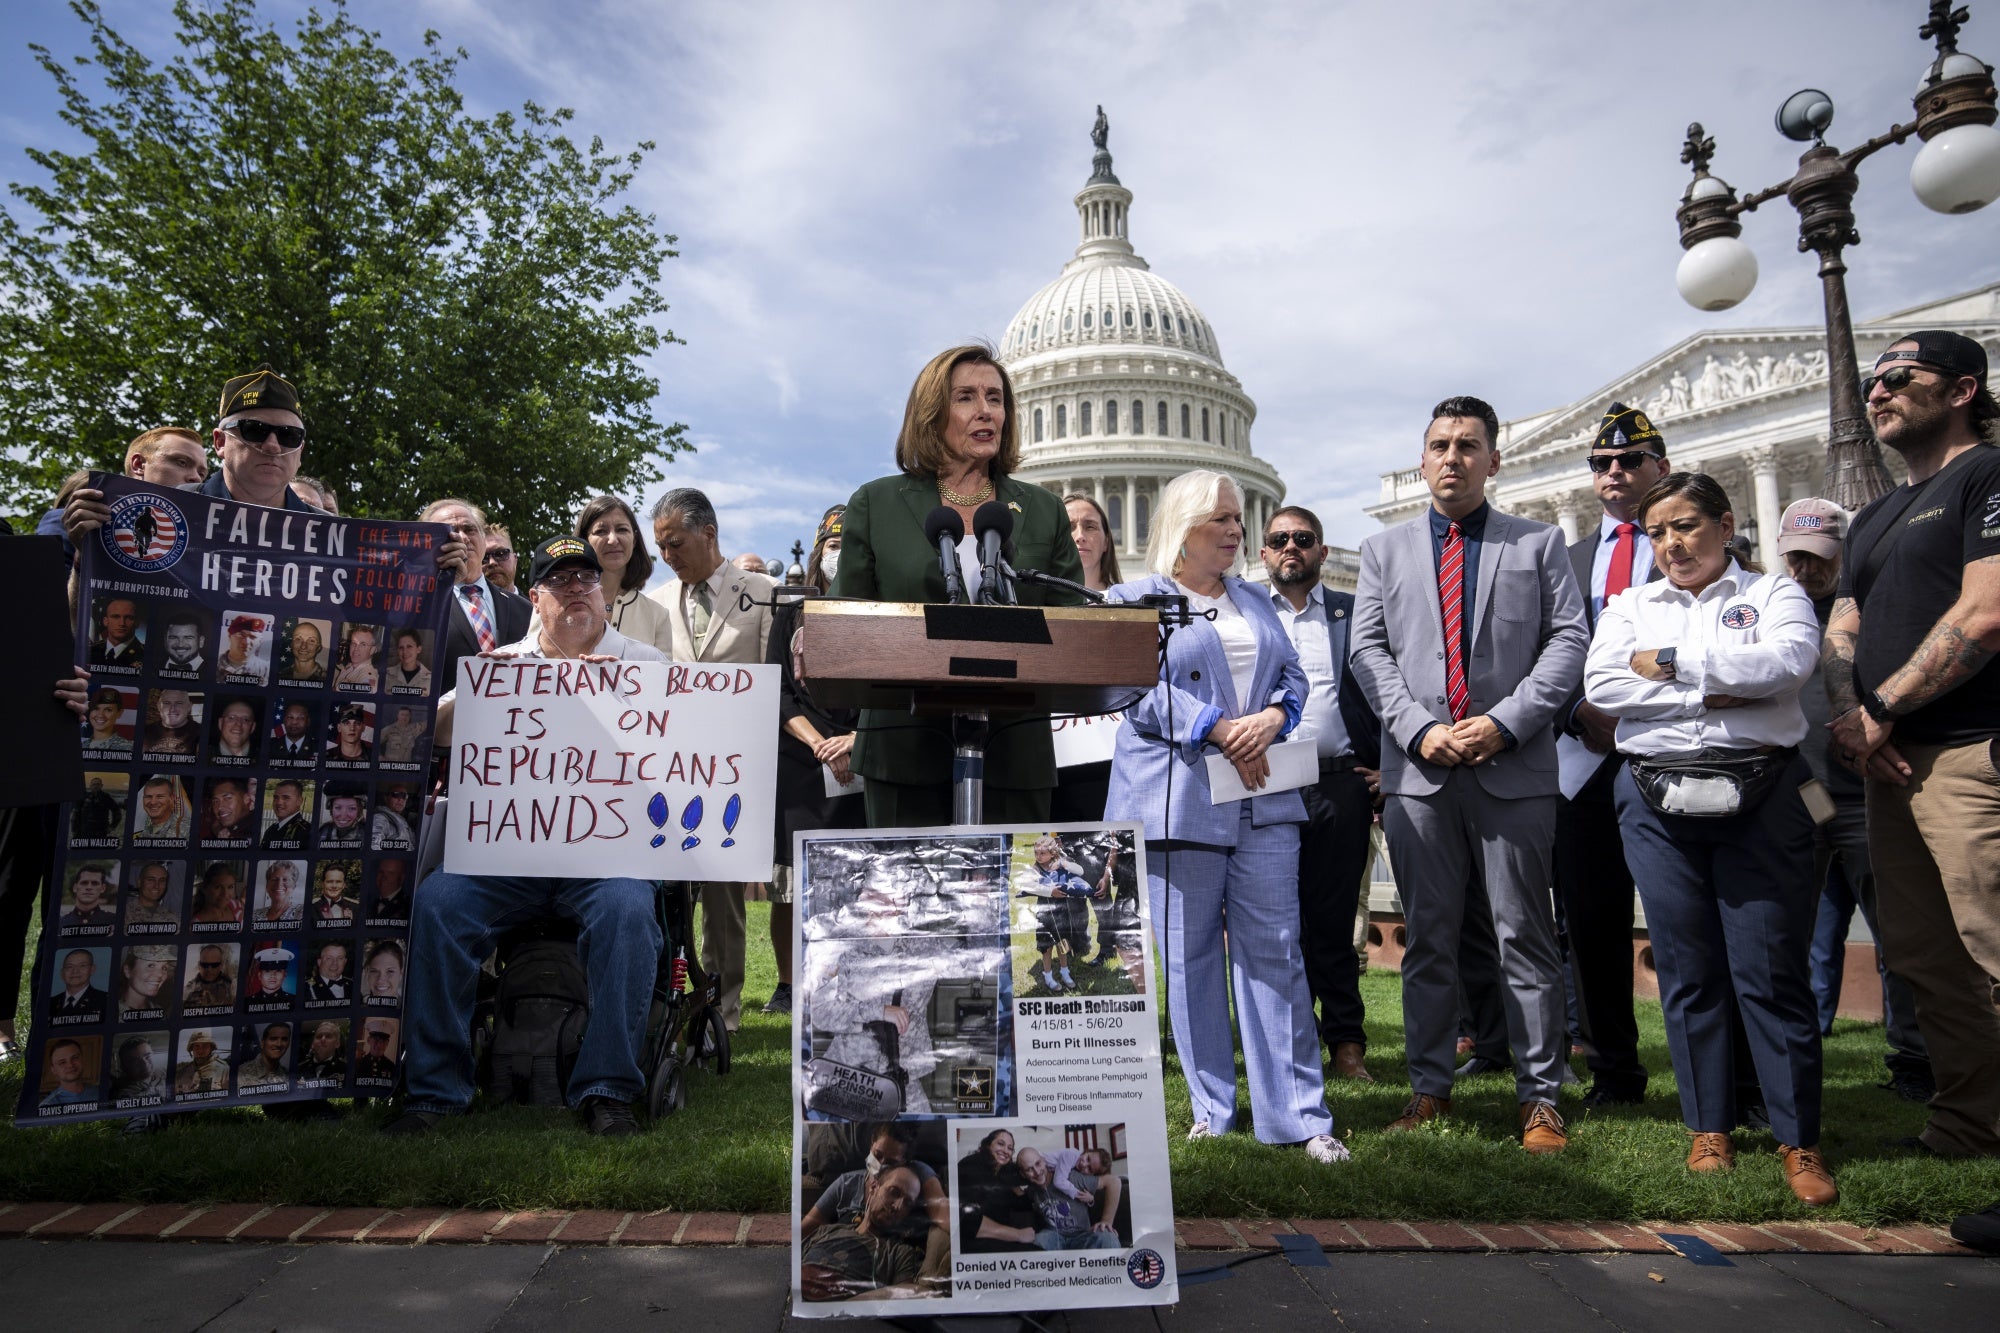 Senate Swamp --  On July 28, 2022, Speaker Pelosi, Jon Stewart, Rosie Torres and Burn Pits 360 Advocates at a press conference following the blocking of the PACT Act by Senate Republicans.